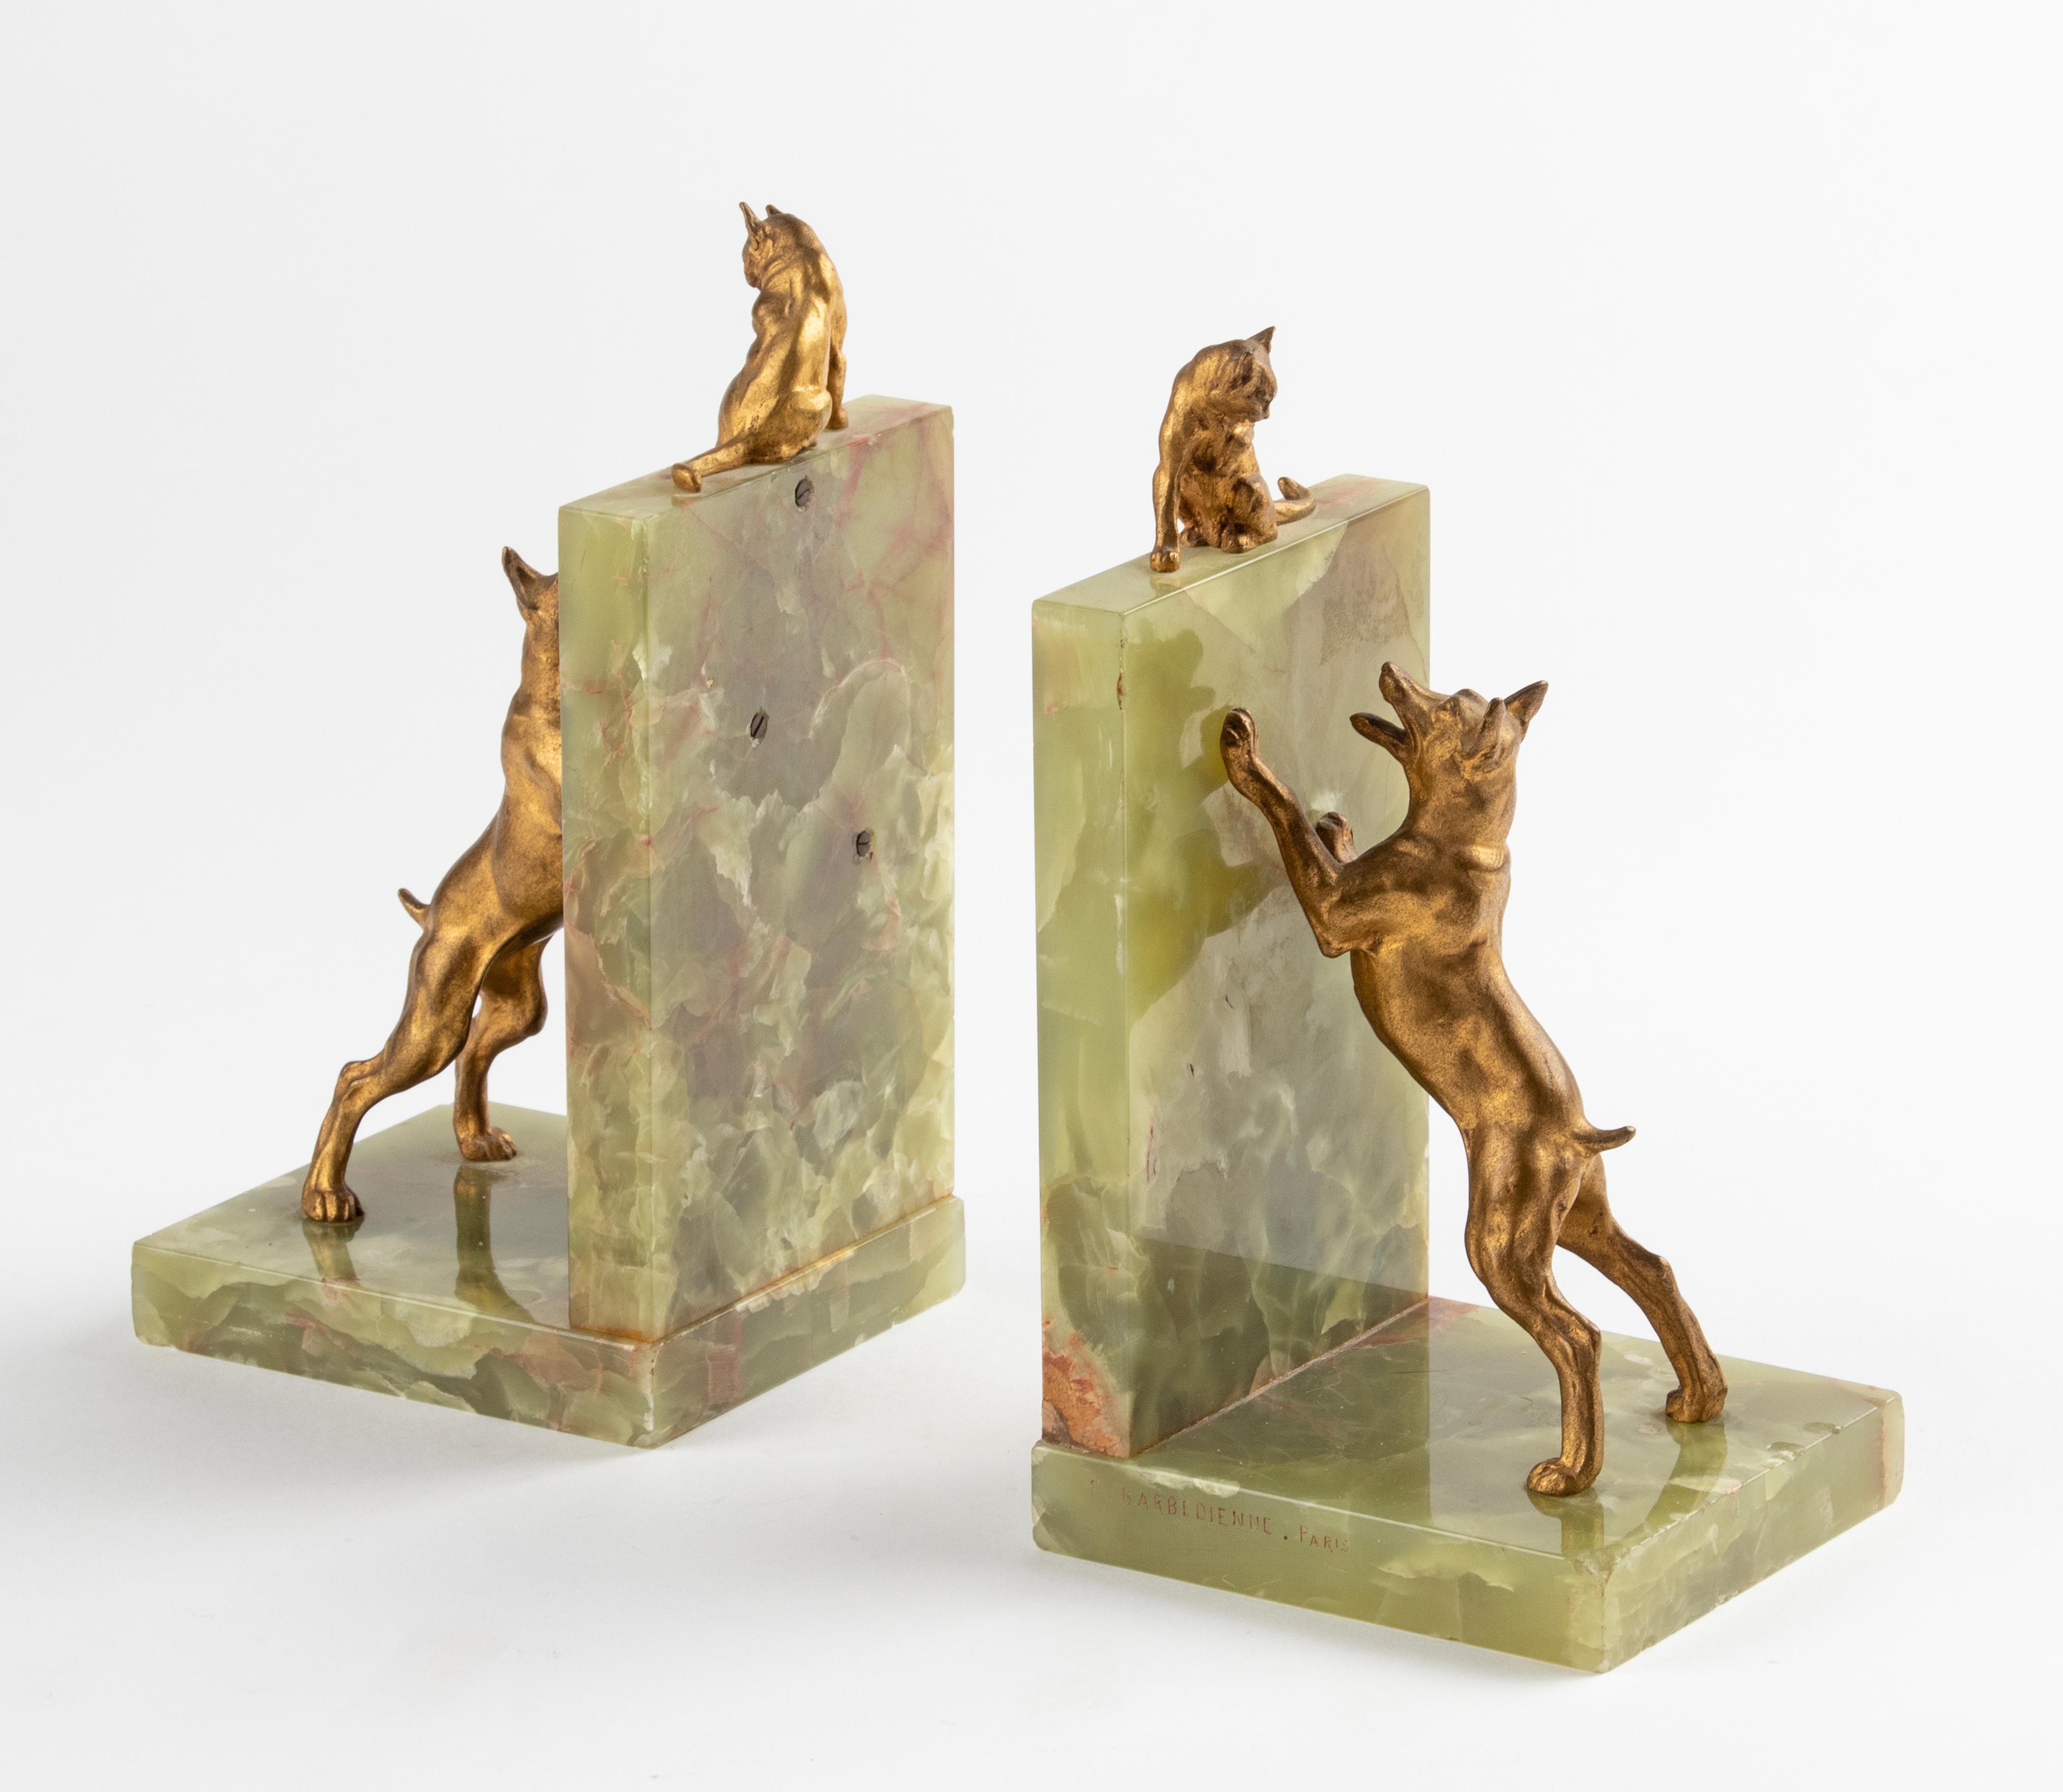 A pair of refined bronze bookends depicting shepherd dogs and cats. The marble and onyx bronze are signed by Ferdinand Barbedienne, Paris. The dogs and cats are finely casted, with an ormolu gilding. Made in France, 1870-1880. The onyx have some